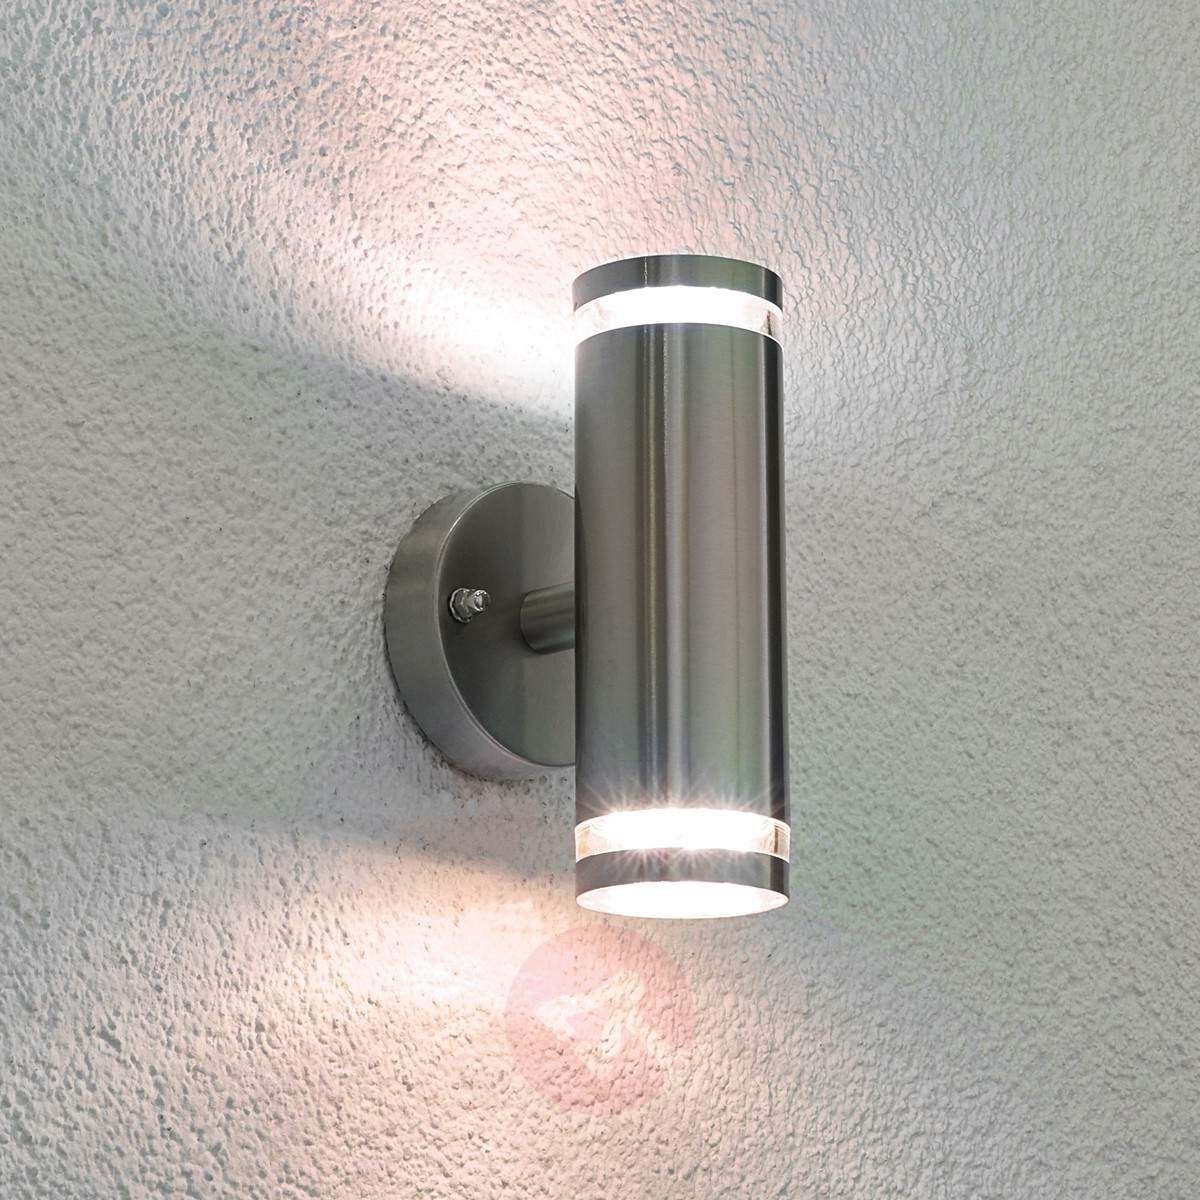 2019 Outdoor Wall Sconce Led Lights Intended For Tiberus Stainless Steel Led Outdoor Wall Light Outdoor Wall Lights (View 9 of 20)